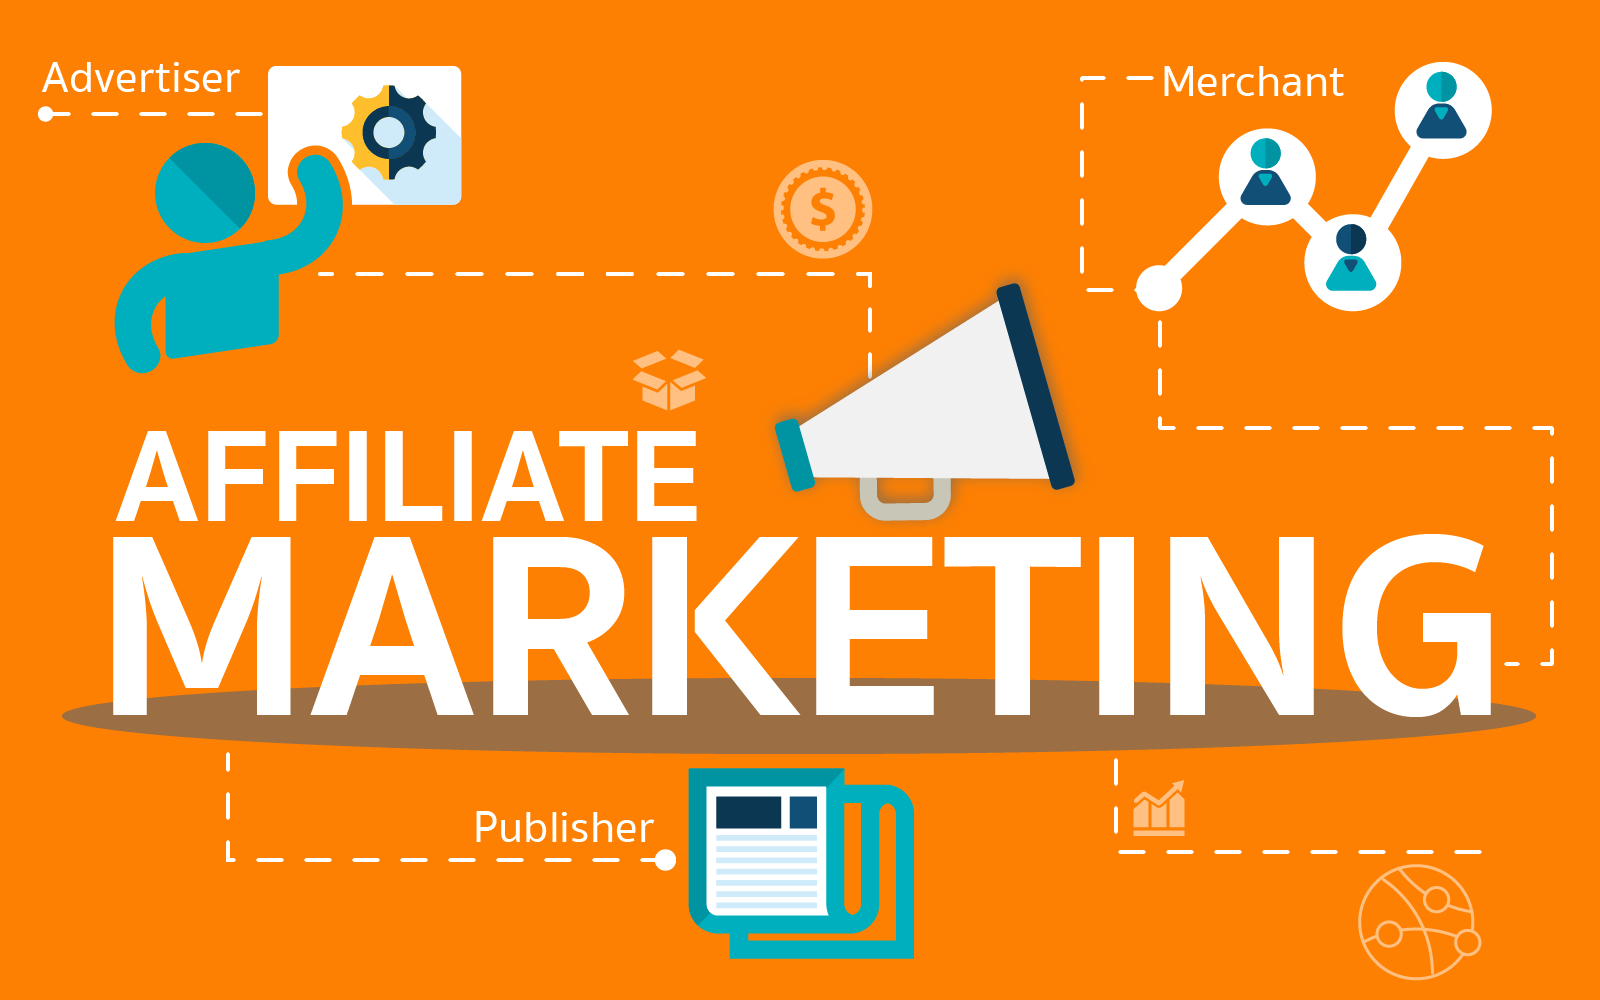 Learn More About Affiliate Marketing